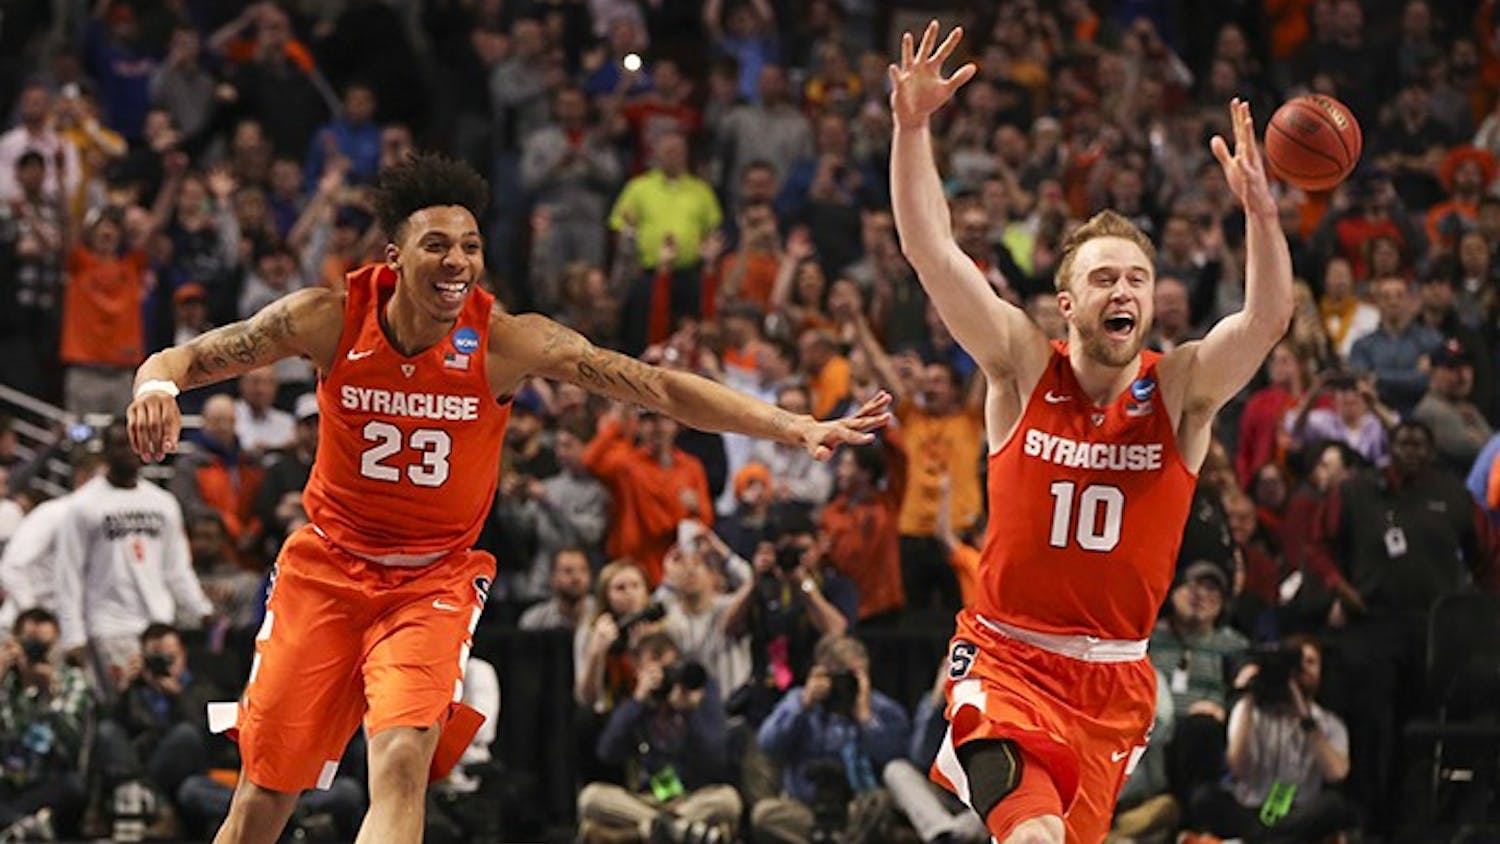 Syracuse Orange guard Malachi Richardson (23) and Syracuse Orange guard Trevor Cooney (10) celebrate at the end of their team&apos;s 68-62 win over the Virginia Cavaliers on Sunday, March 27, 2016, at the United Center in Chicago. (Nuccio DiNuzzo/Chicago Tribune/TNS)